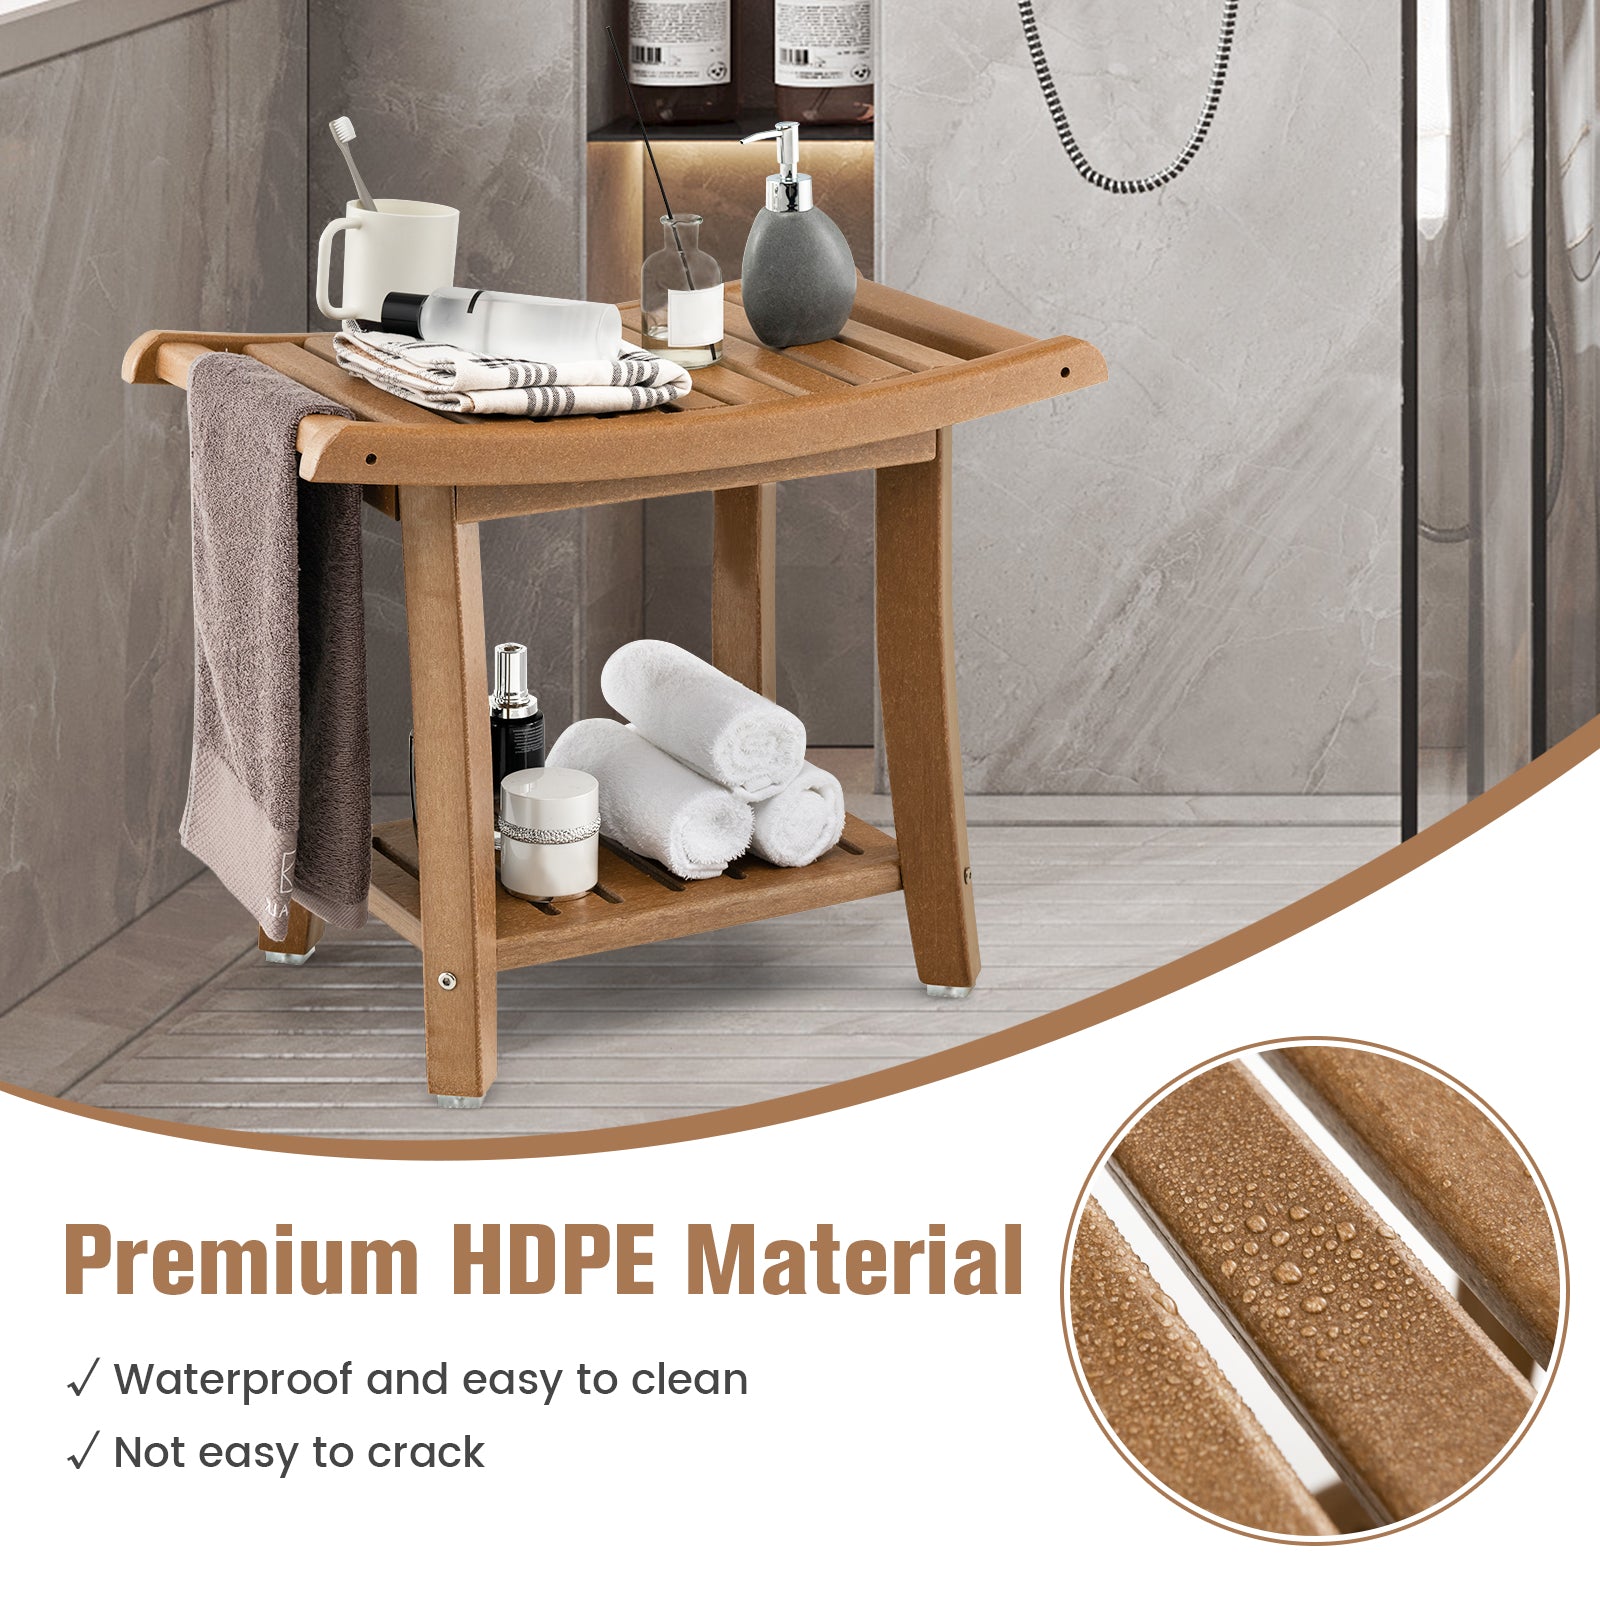 2-tier HDPE Waterproof Shower Bench with Curved Seat-Brown